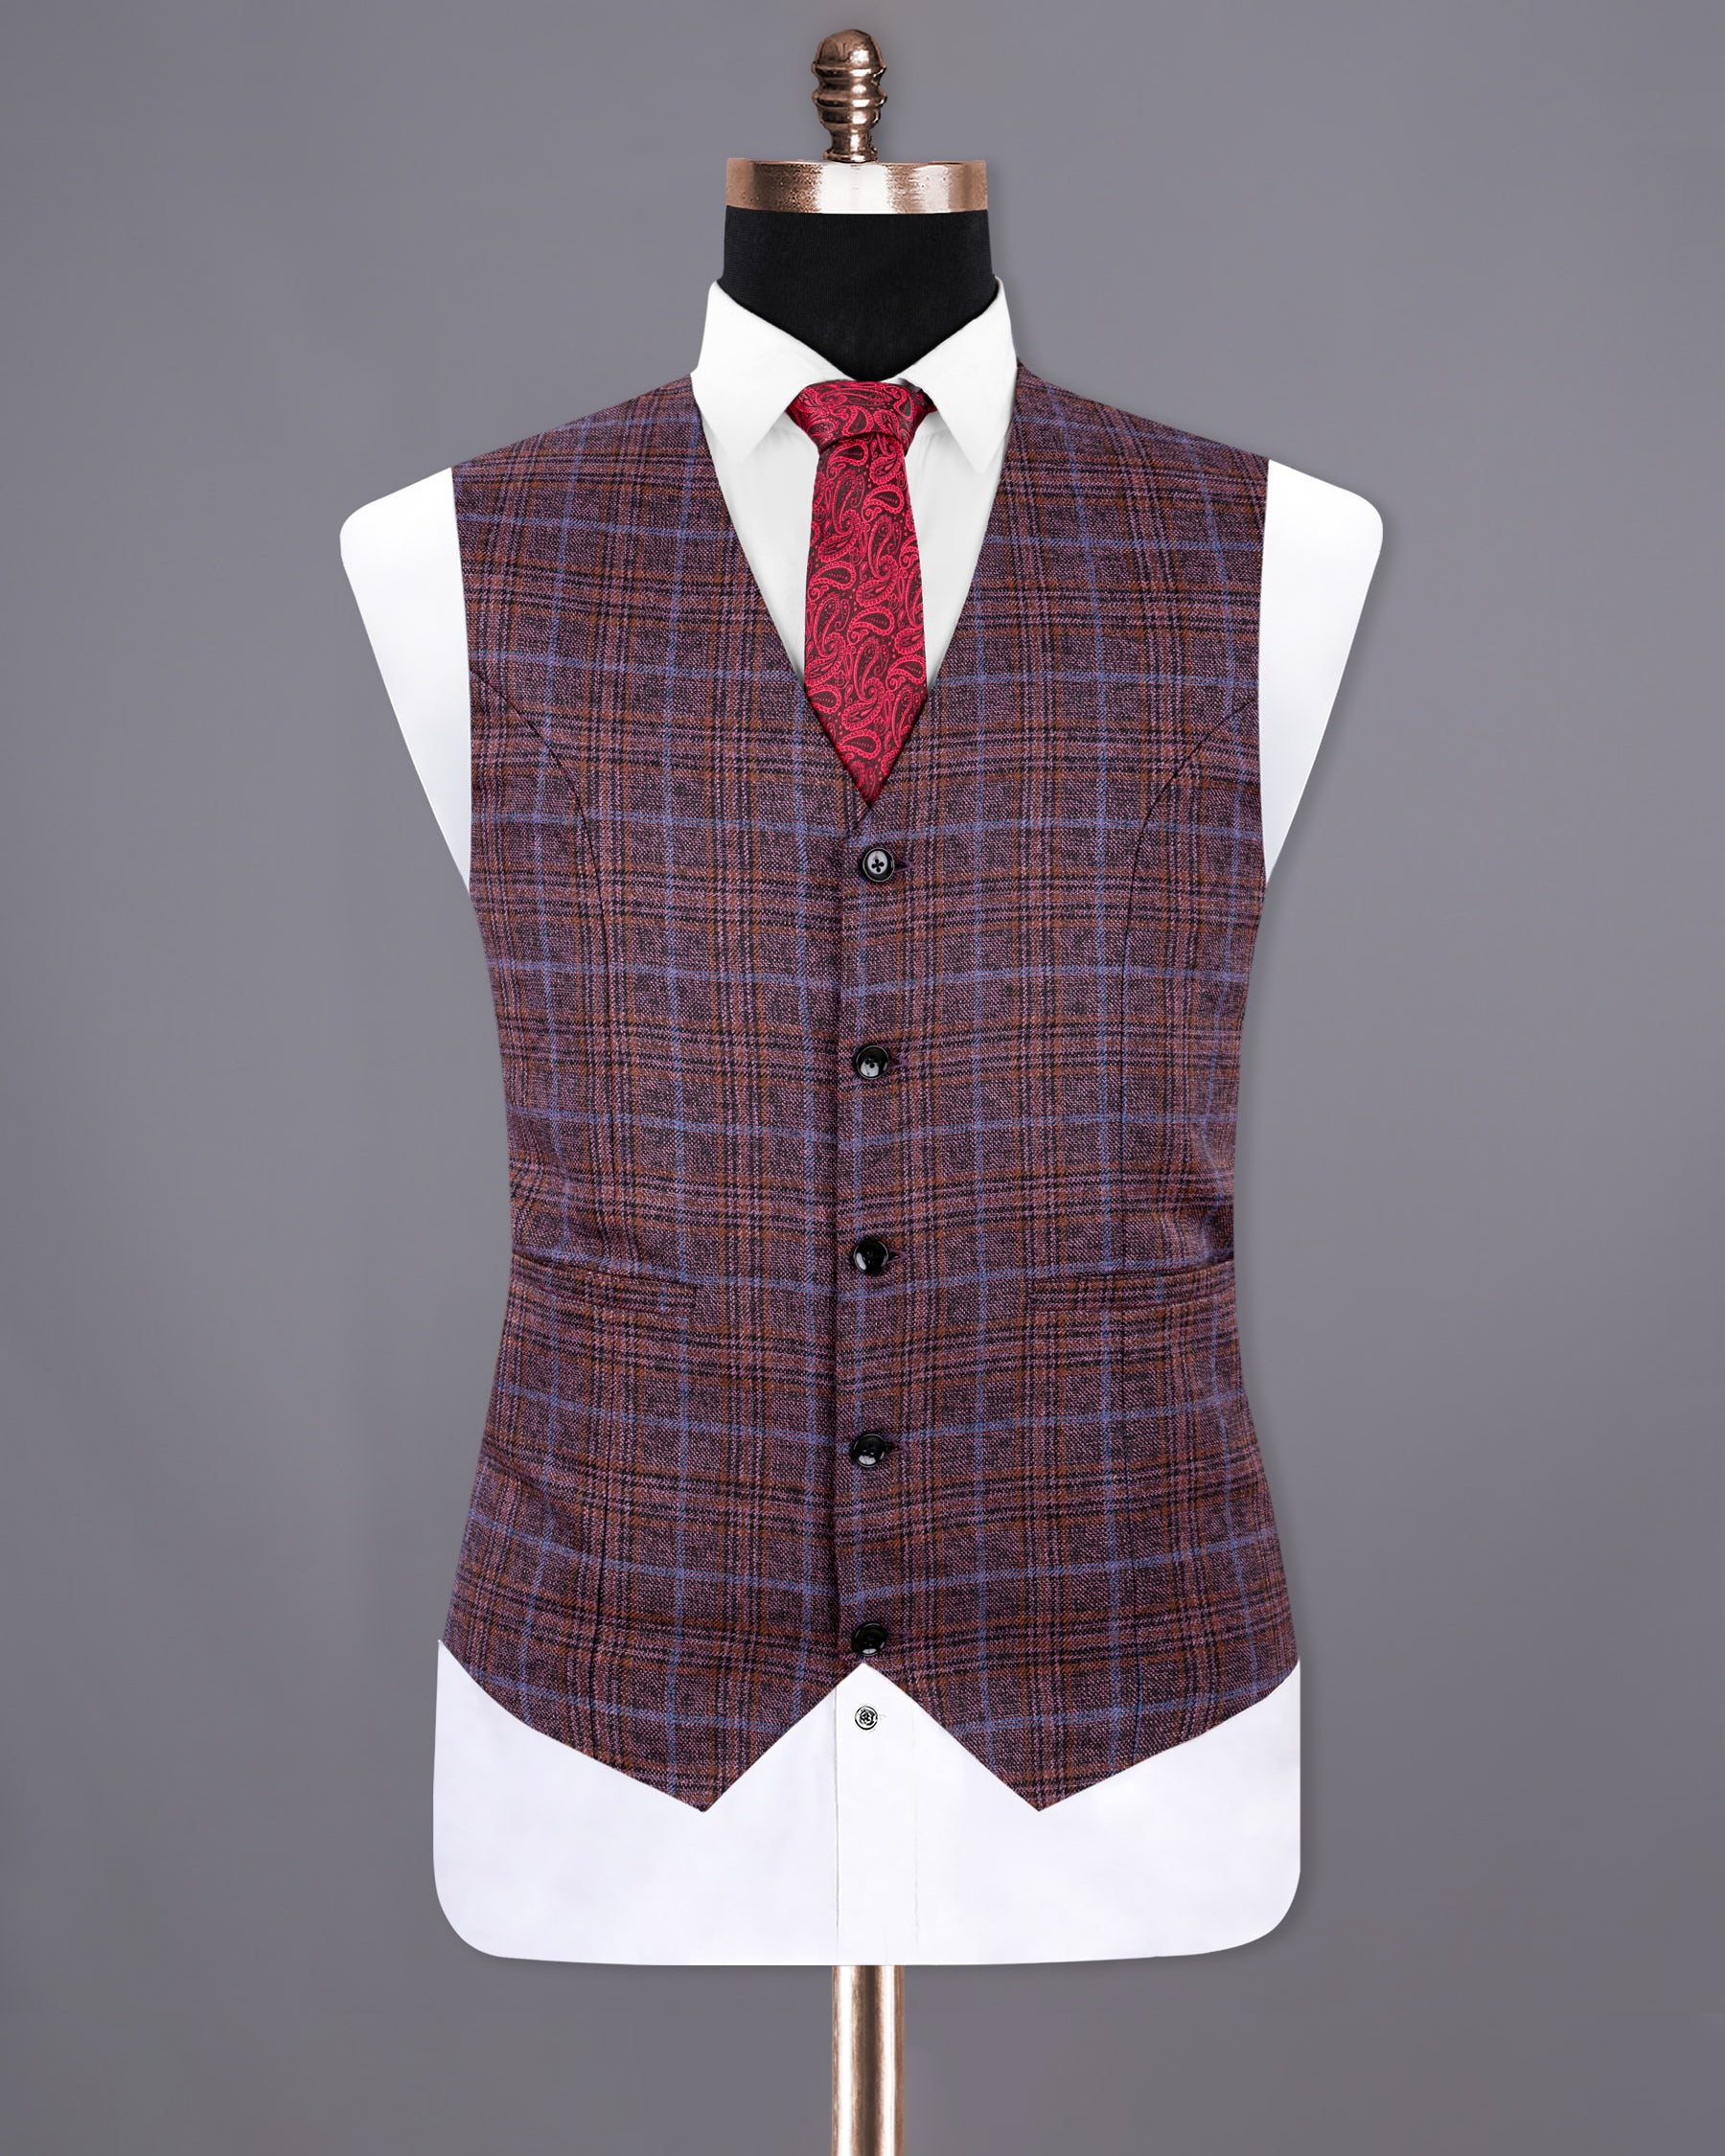 Old Copper Colorful Plaid Wool Rich Waistcoat V1235-36, V1235-40, V1235-52, V1235-60, V1235-38, V1235-42, V1235-44, V1235-46, V1235-48, V1235-50, V1235-54, V1235-56, V1235-58